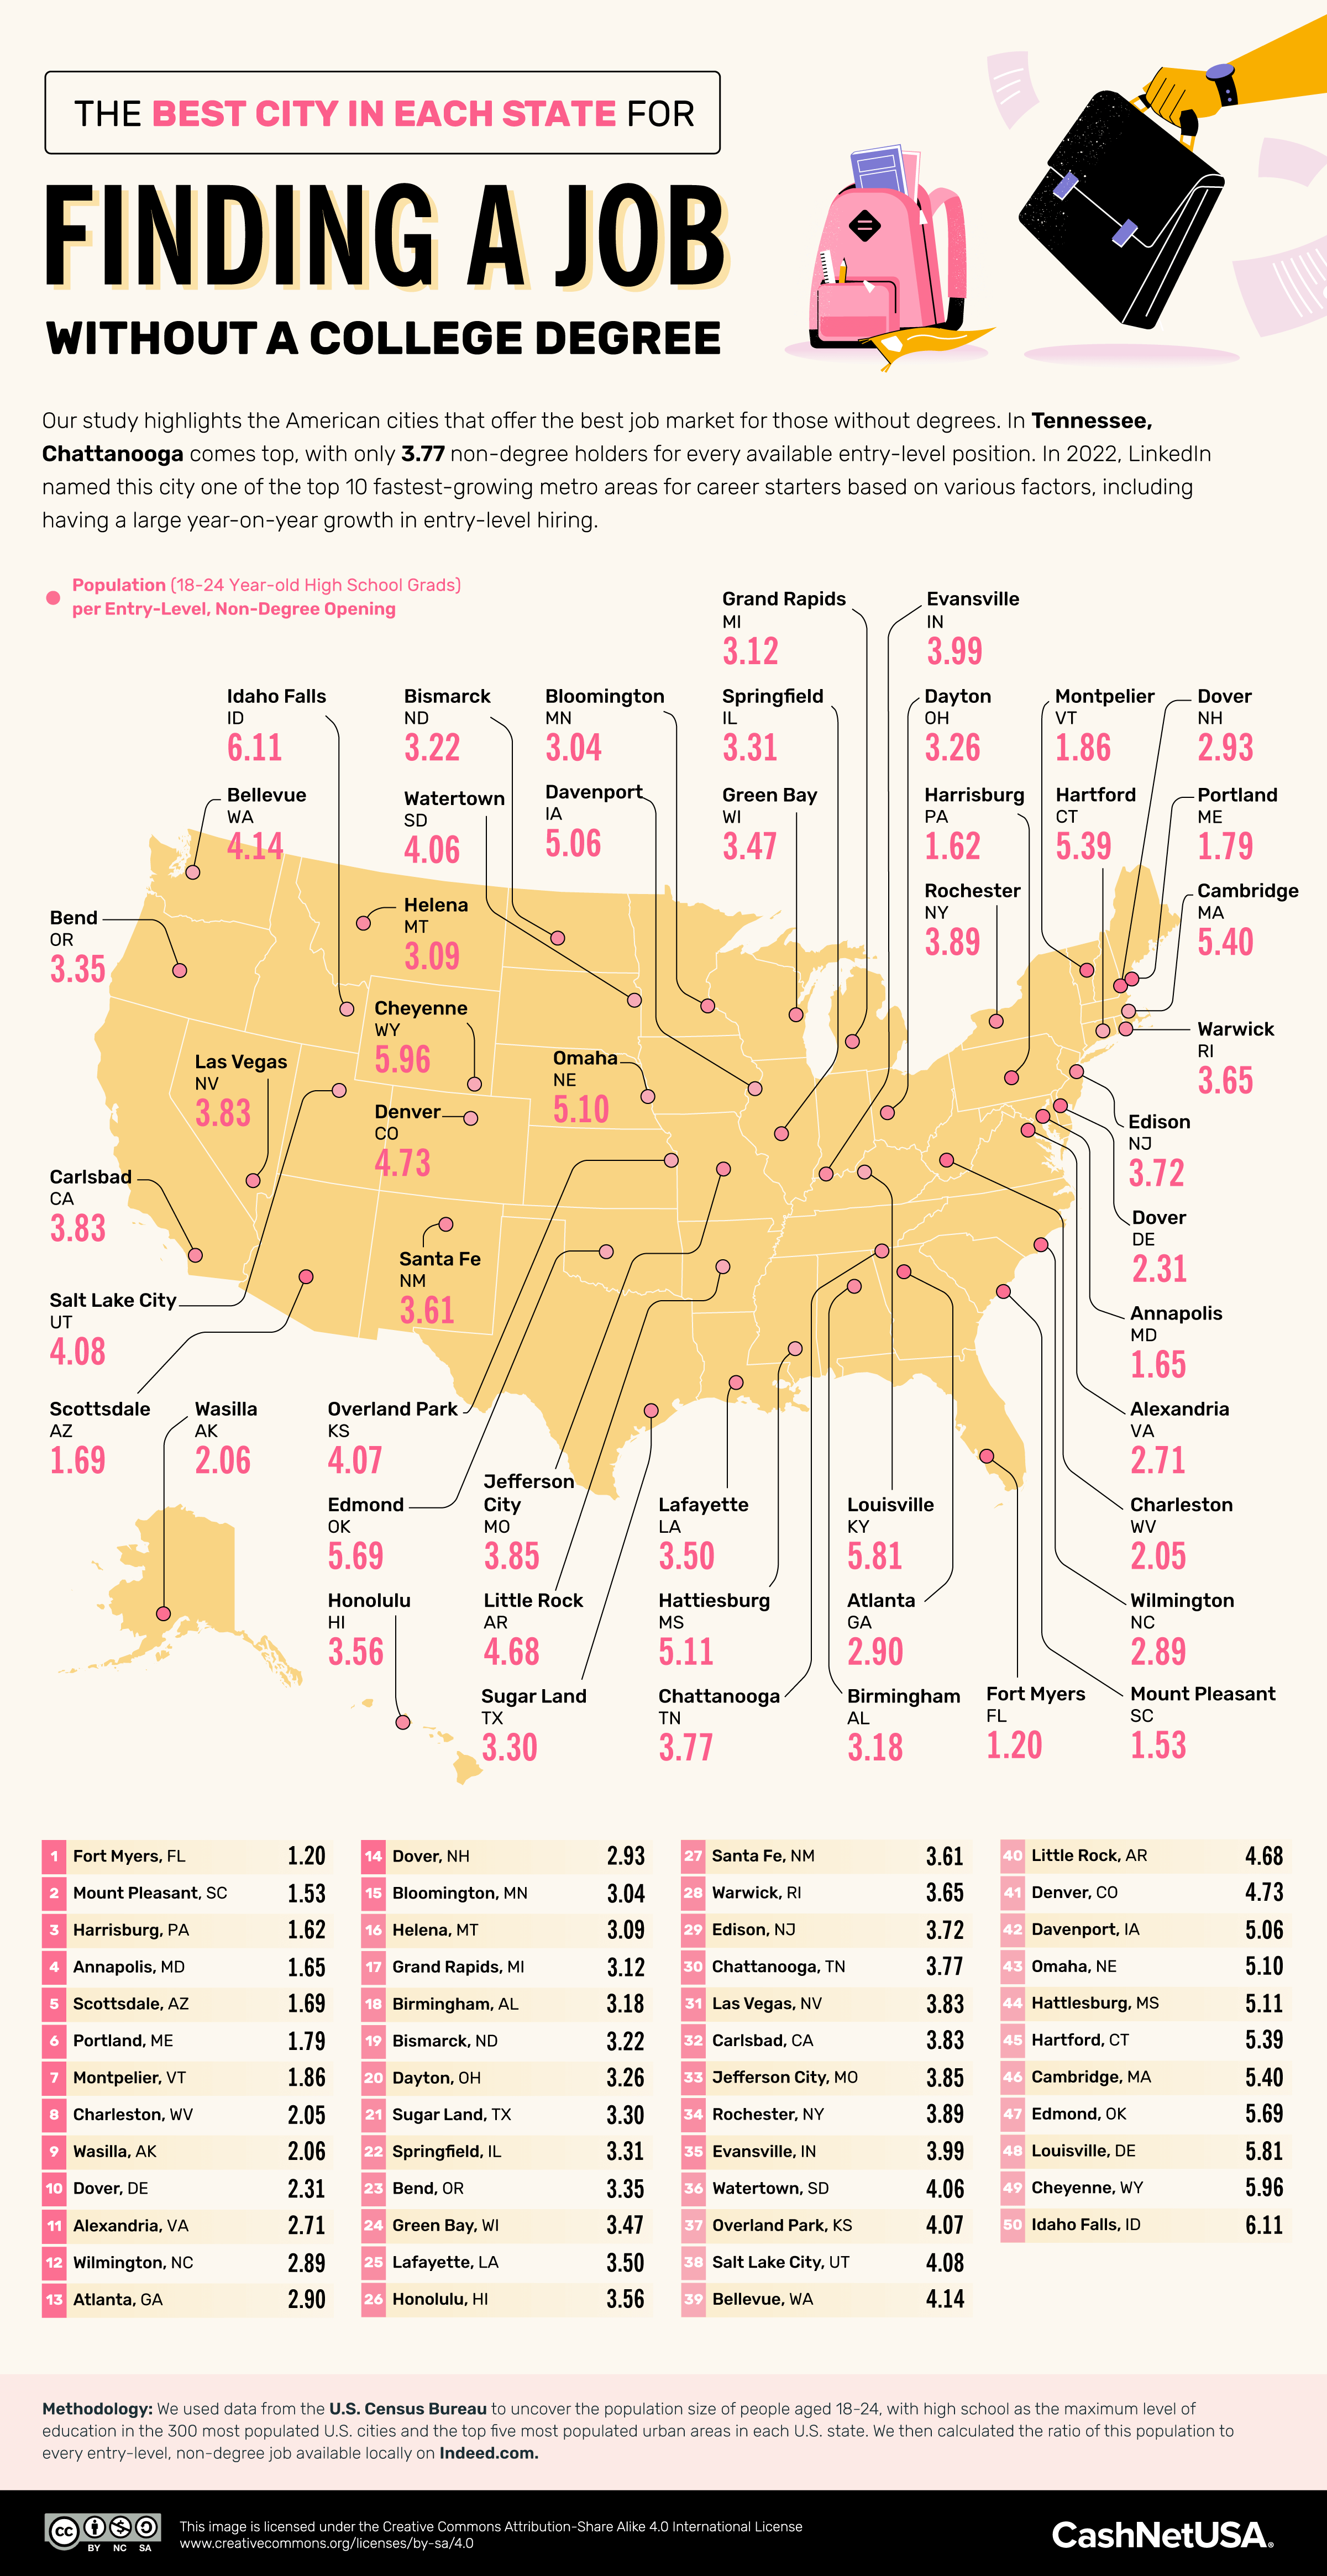 U.S. cities in each state with the least competitive job markets for non-degree holders